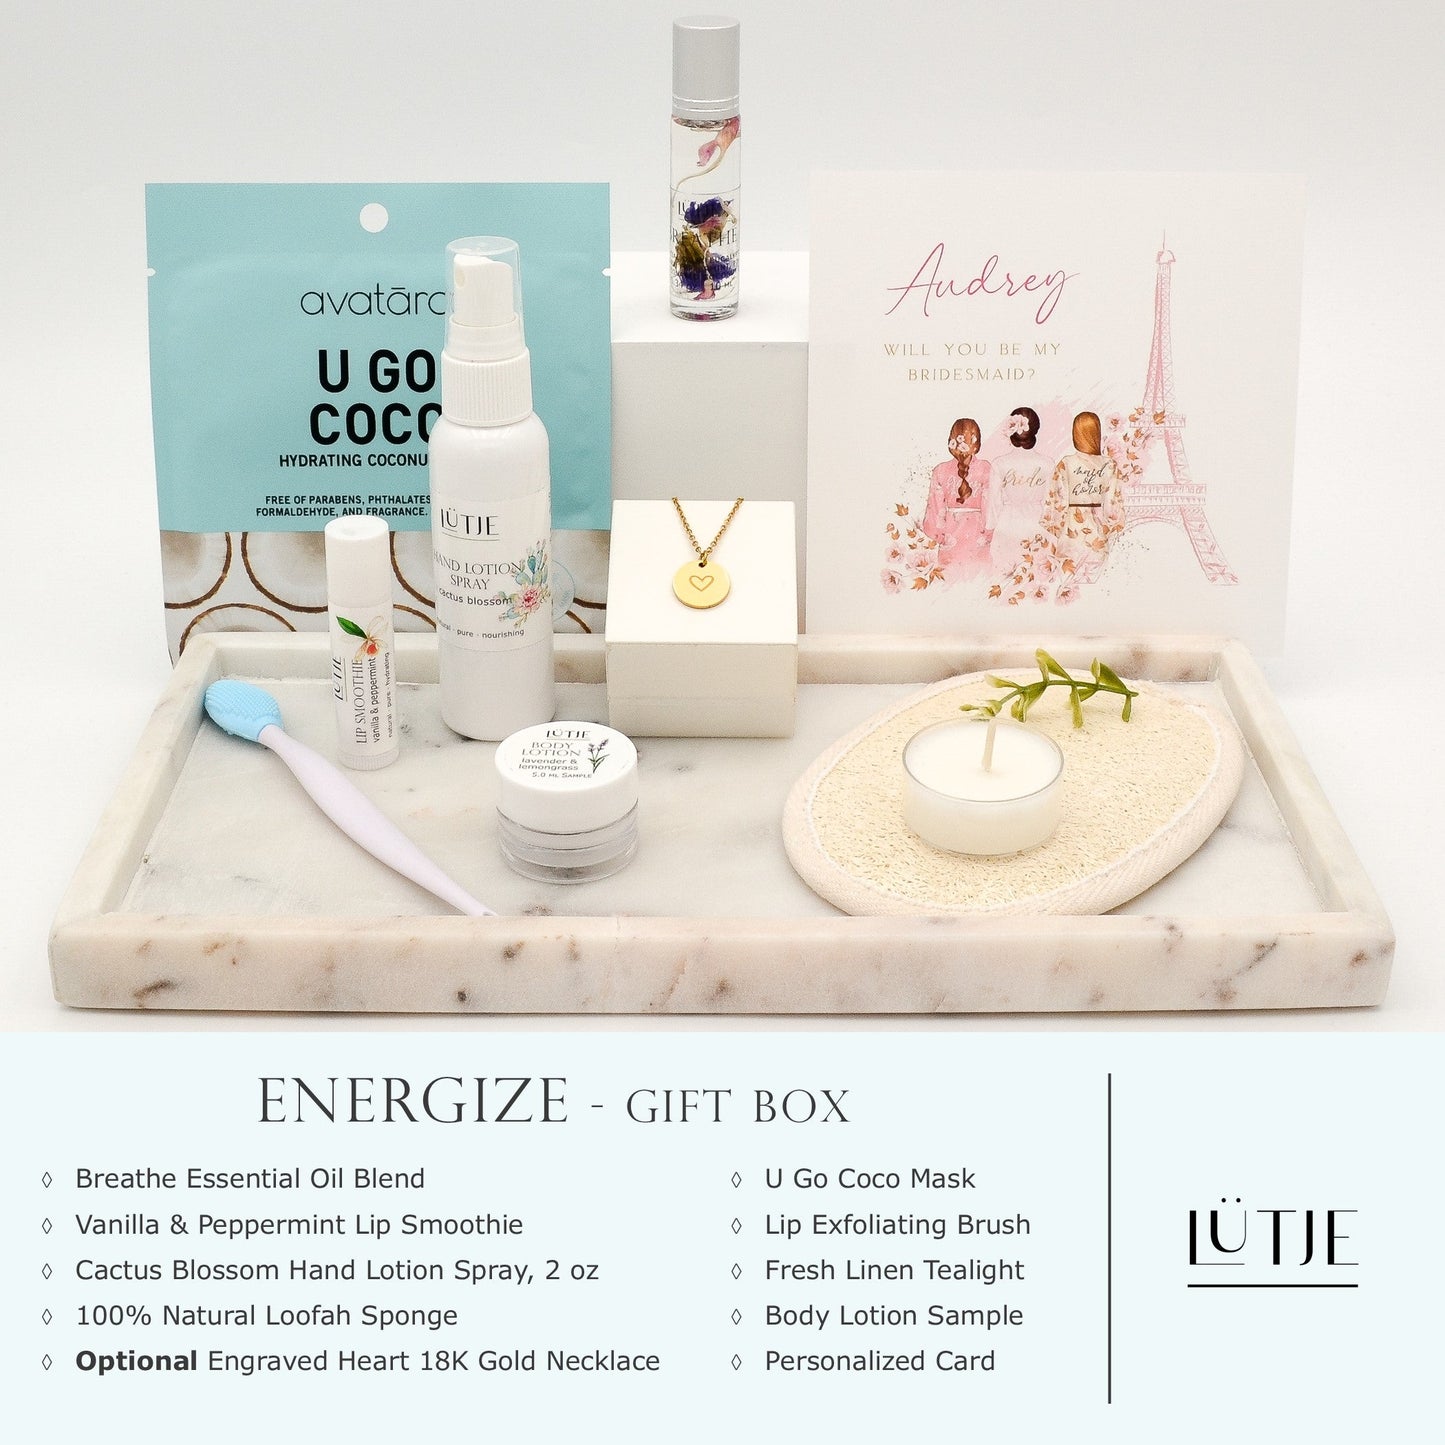 Energize Gift Box for women, BFF, wife, daughter, sister, mom, or grandma, includes Cactus Blossom hand lotion spray, essential oil, lip balm, hydrating face mask, other bath, spa and self-care items, and 18K gold-plated necklace with engraved heart.